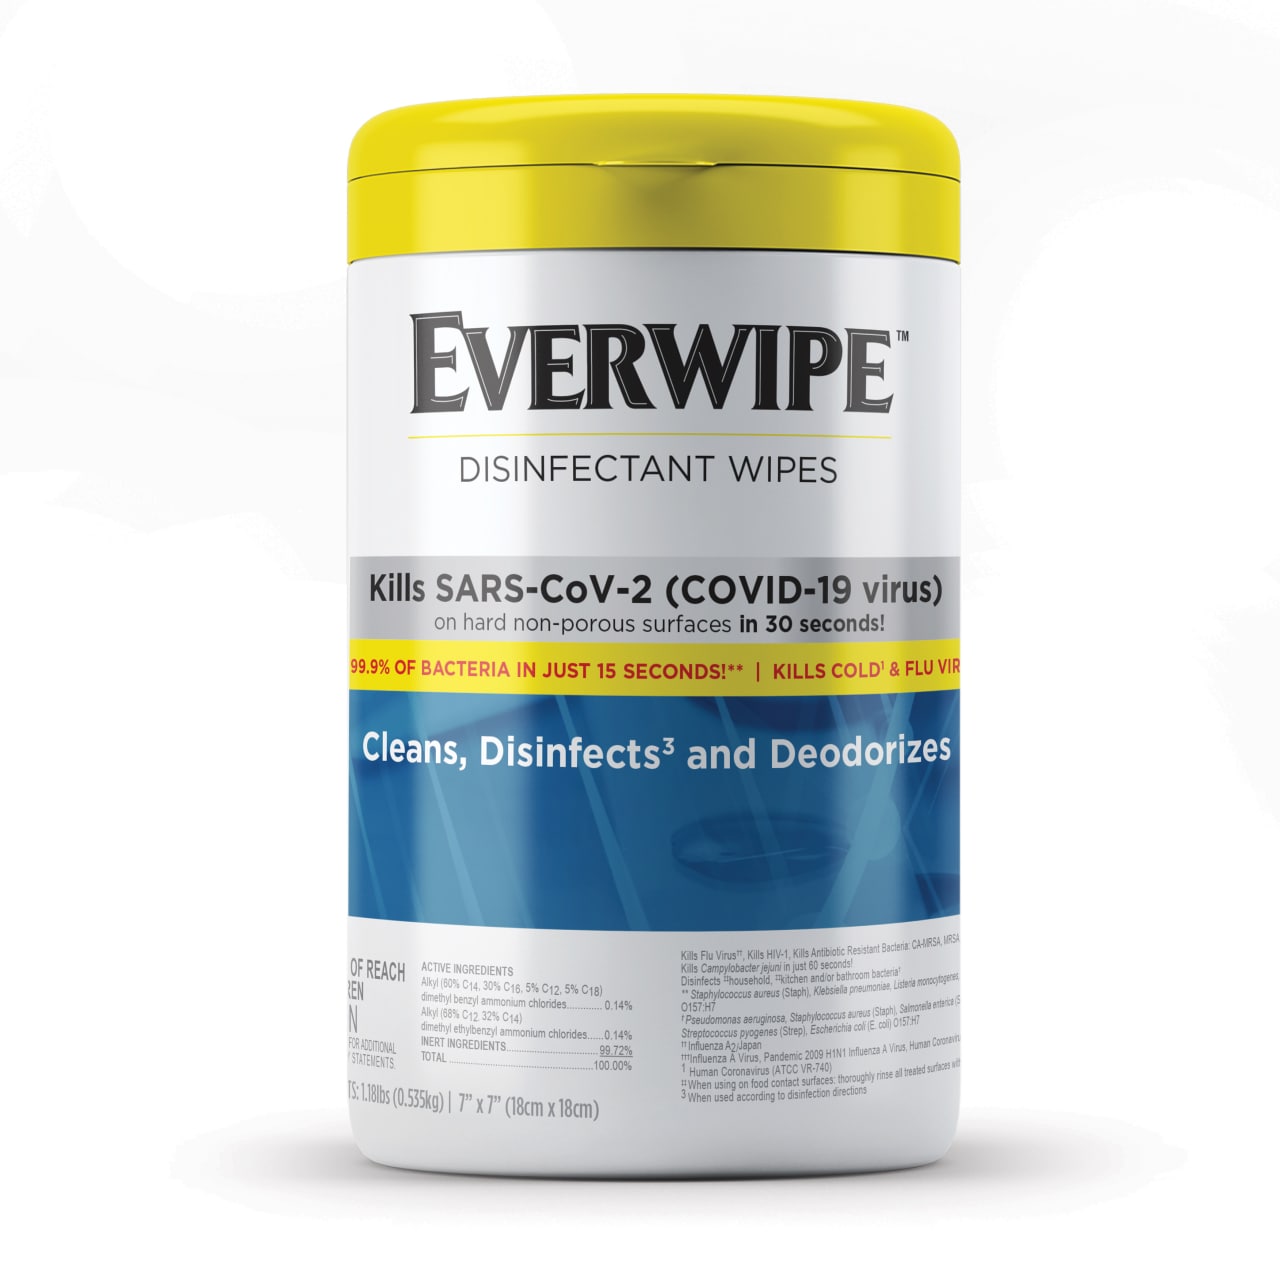 COVID-19: Here's where to buy cleaning wipes